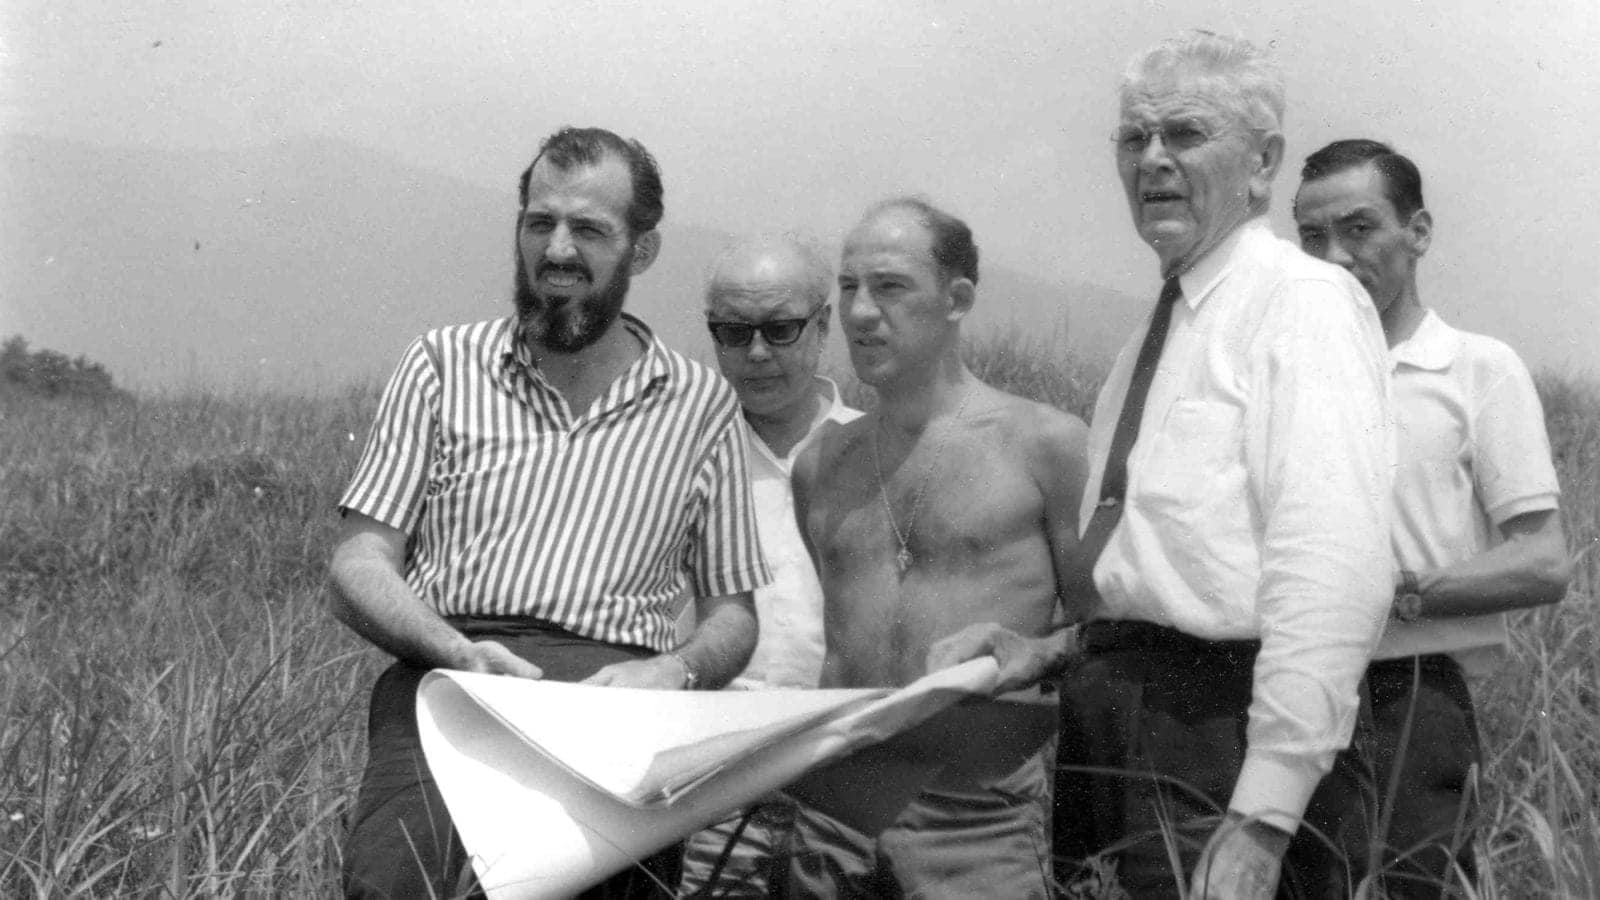 Stirling Moss and Don Nichols in Japan at the site of the proposed Fuji Speedway